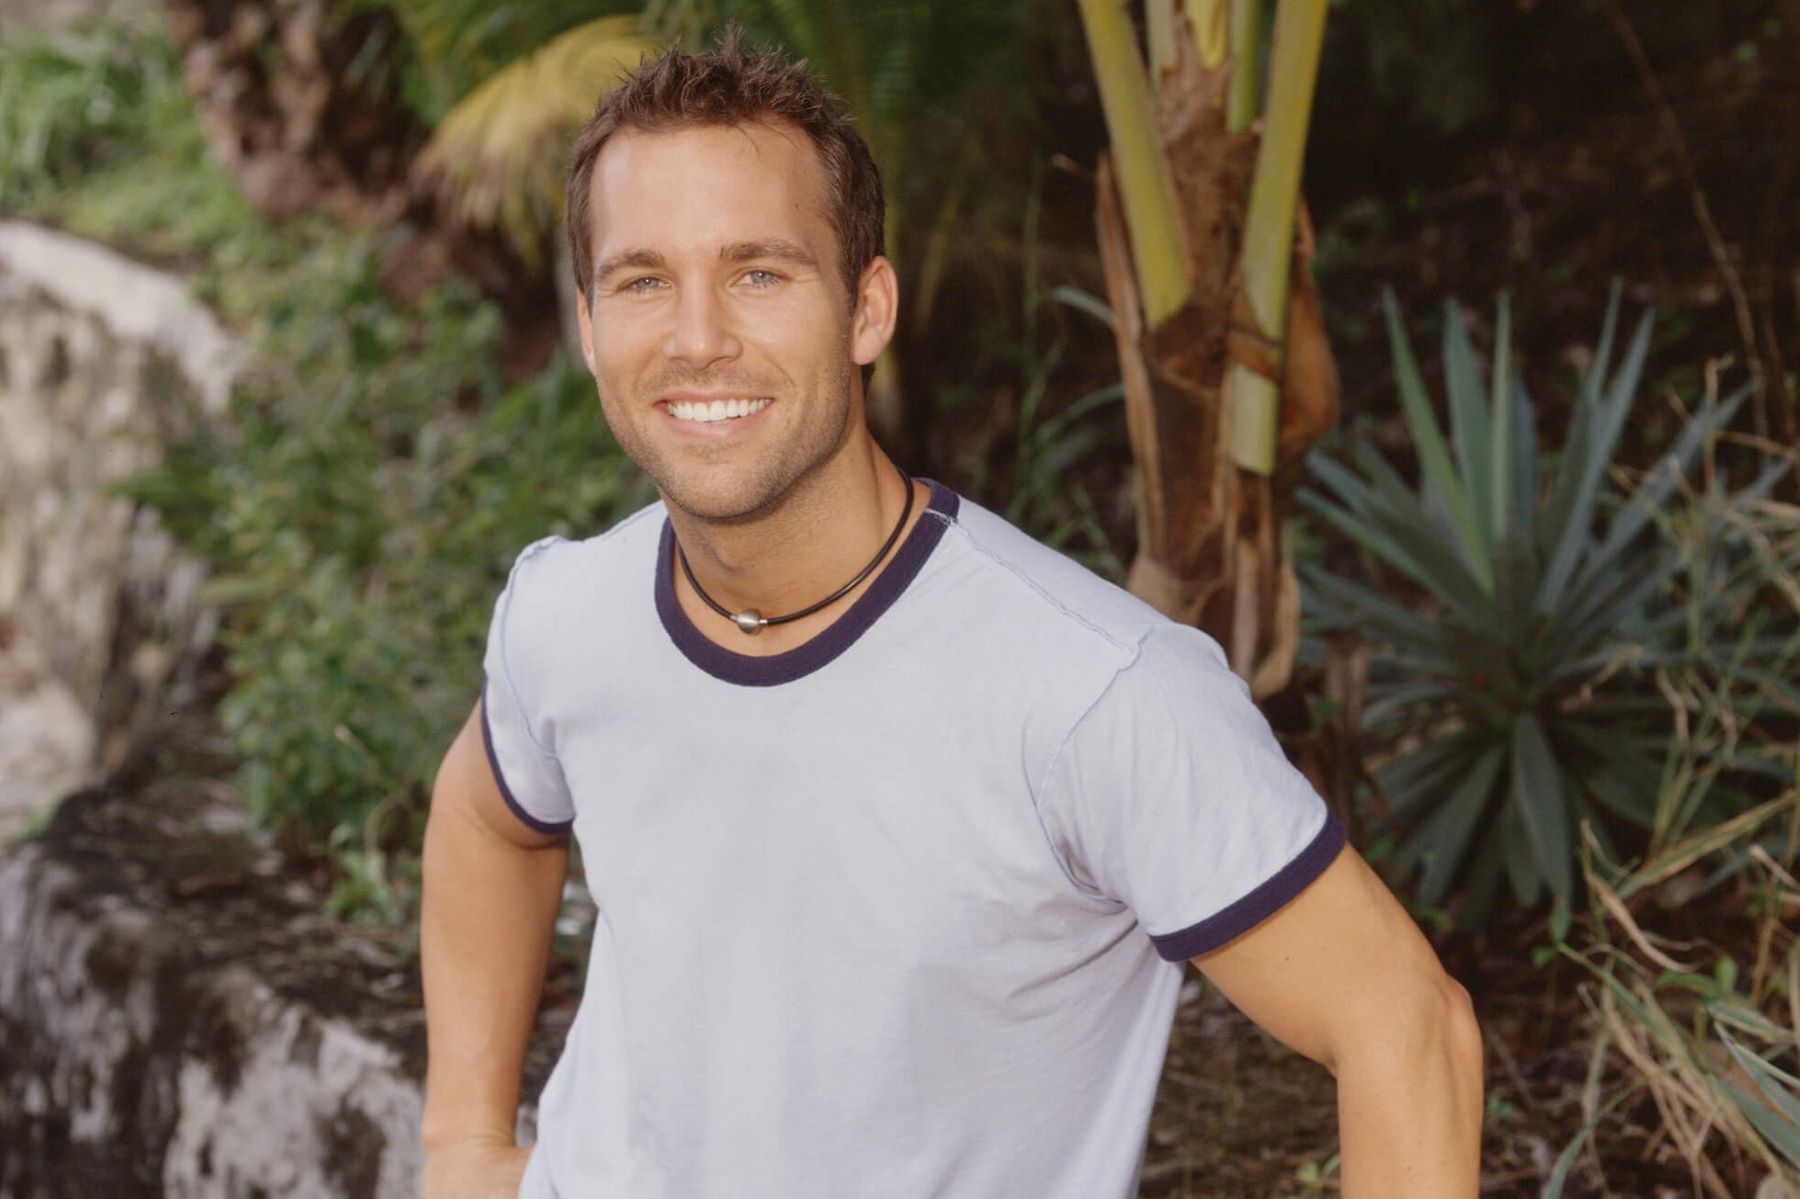 Colby Donaldson, a contestant from 'Survivor' on CBS, wears a light blue t-shirt and leans against a rock wall.